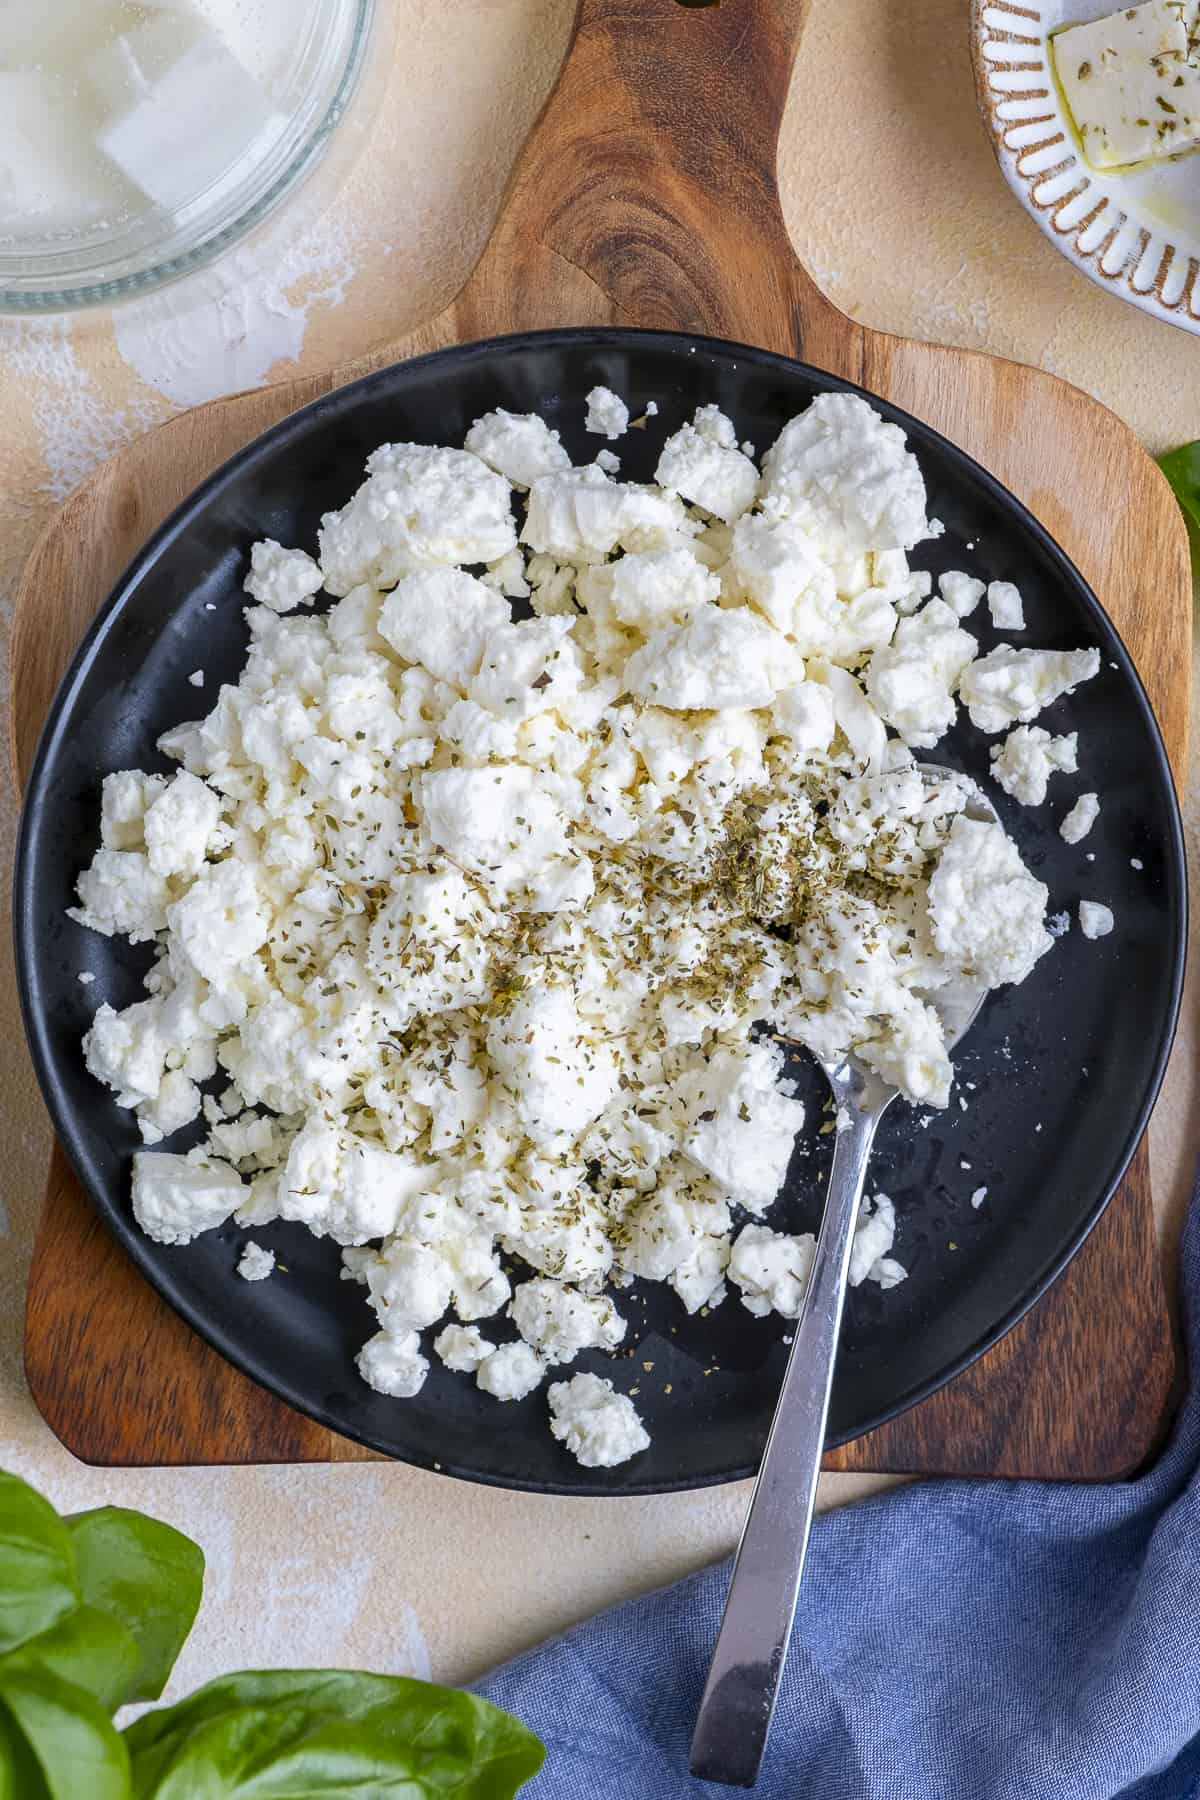 Crumbled feta cheese seasoned with oregano on a black plate with a spoon in it.